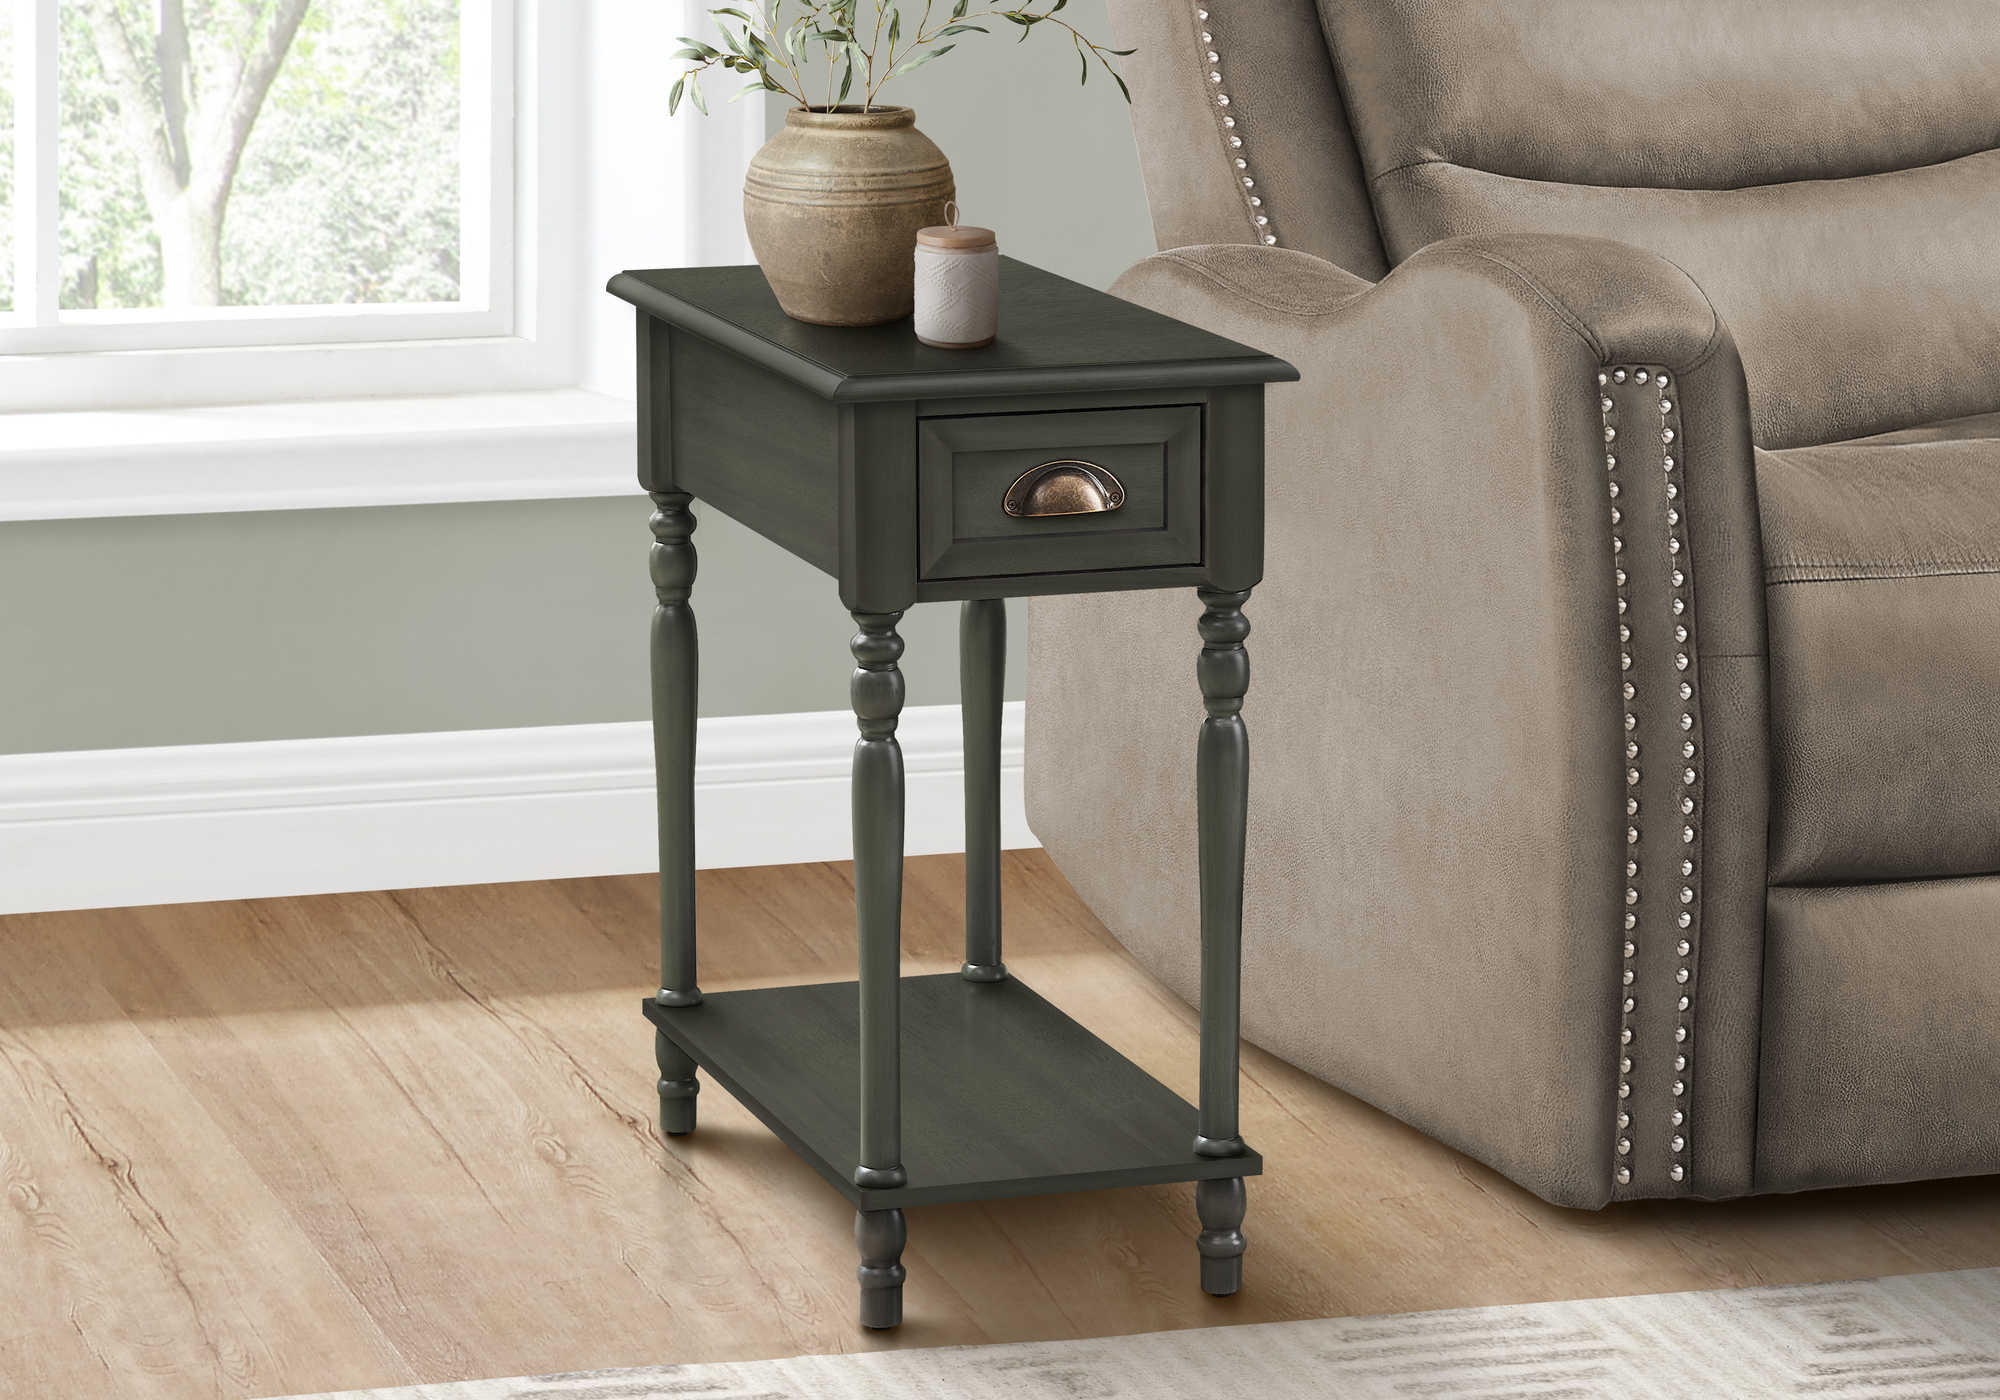 ACCENT TABLE - 24"H / DARK GREEN VENEER END TABLE